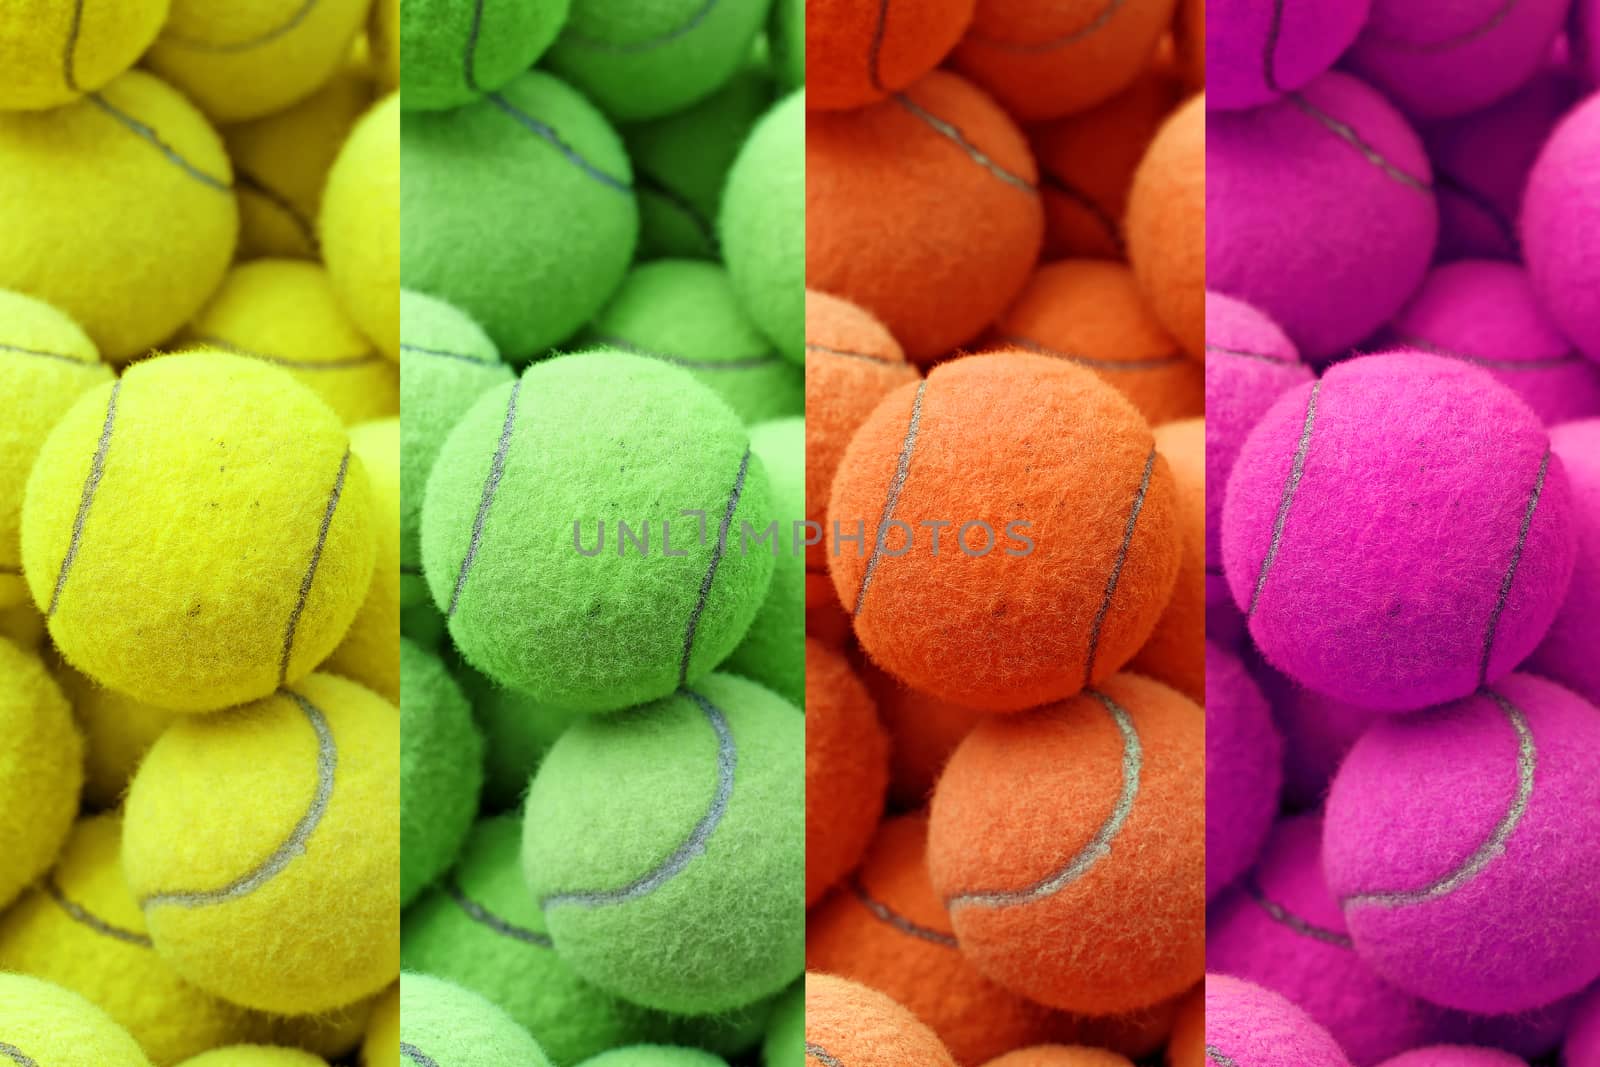 exotic color tennis ball as sport background